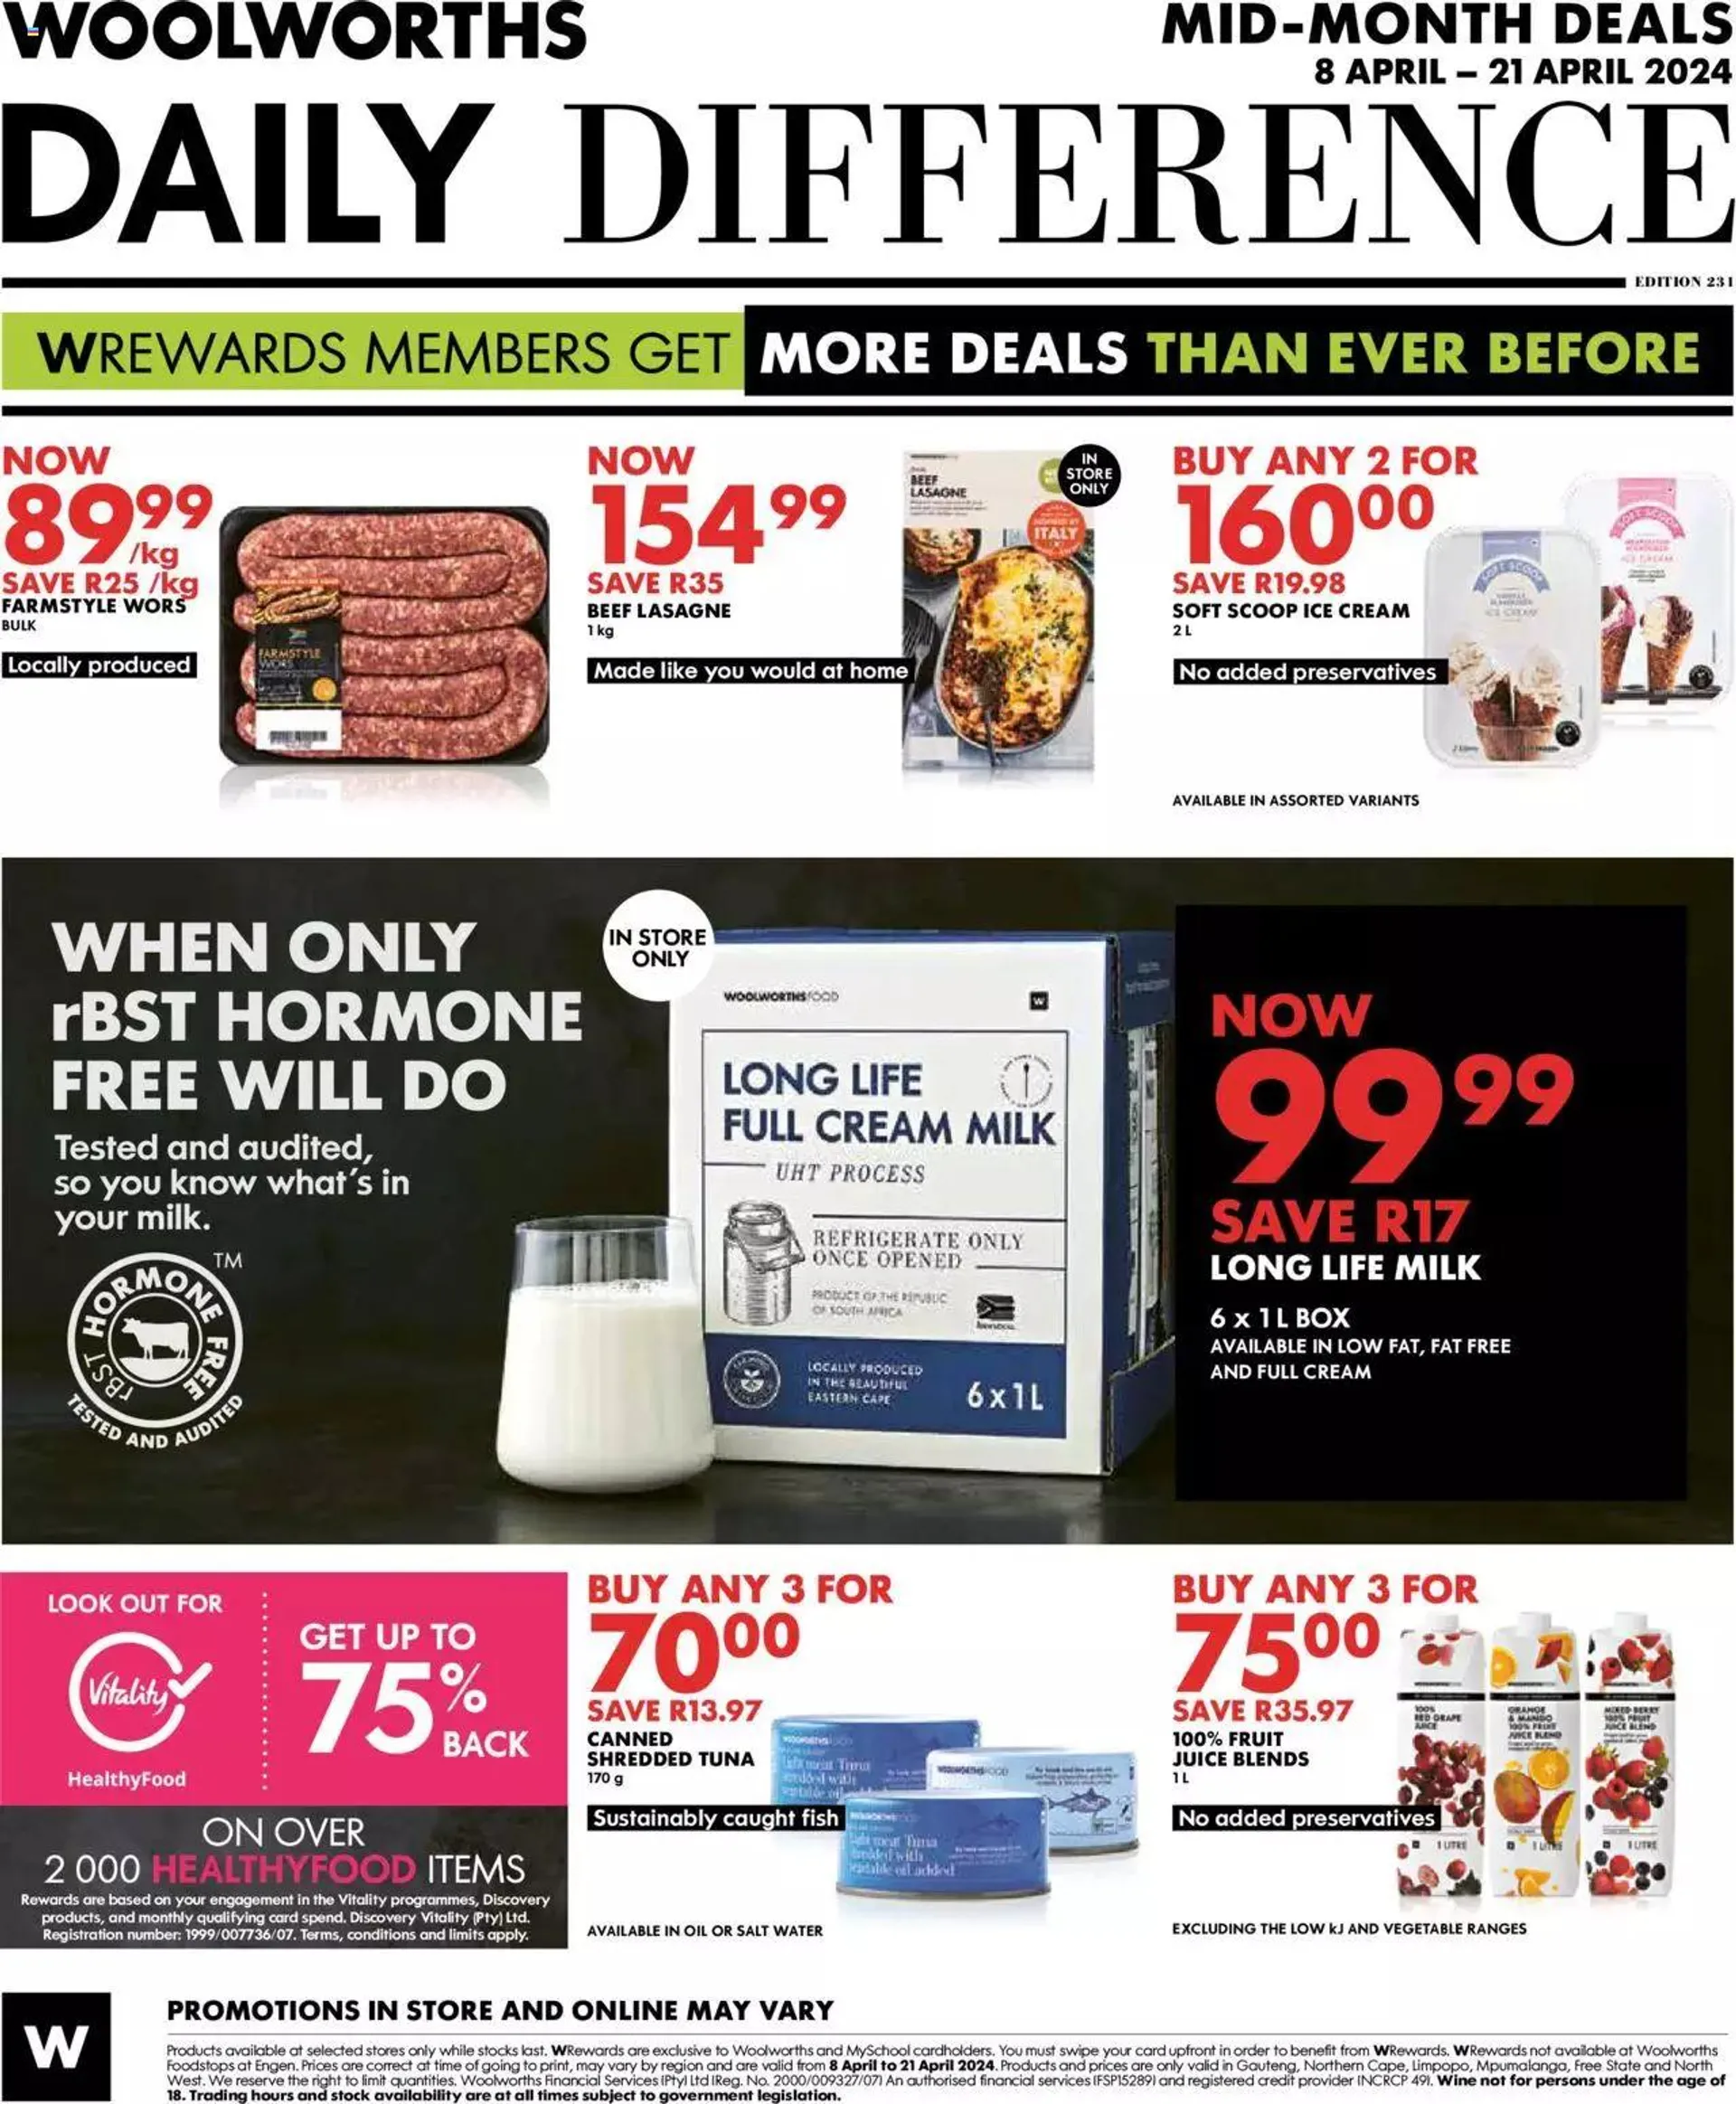 Woolworths Daily Difference - Gauteng - 7